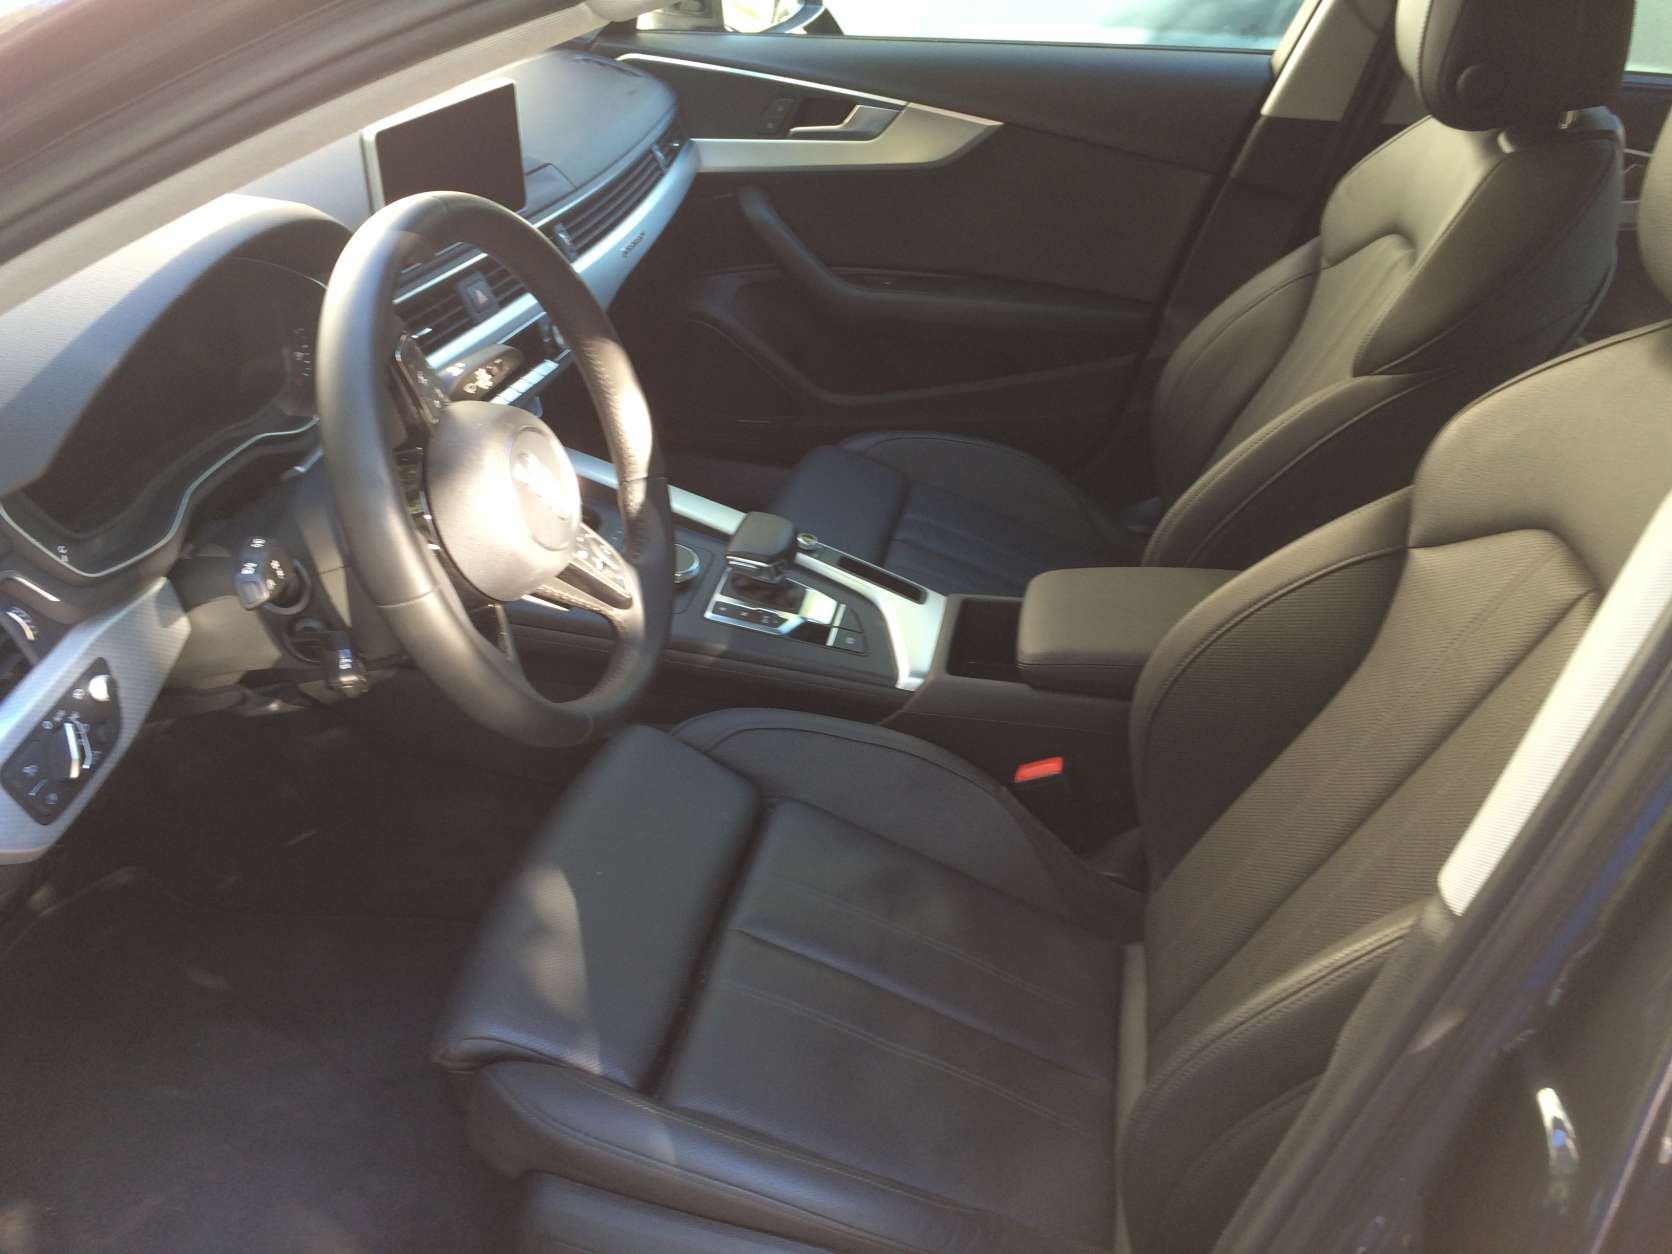 The interior is helped by the pricey $8,600 Prestige package, with heated power front seats that are the right combination of supportive without being too firm. (WTOP/Mike Parris)